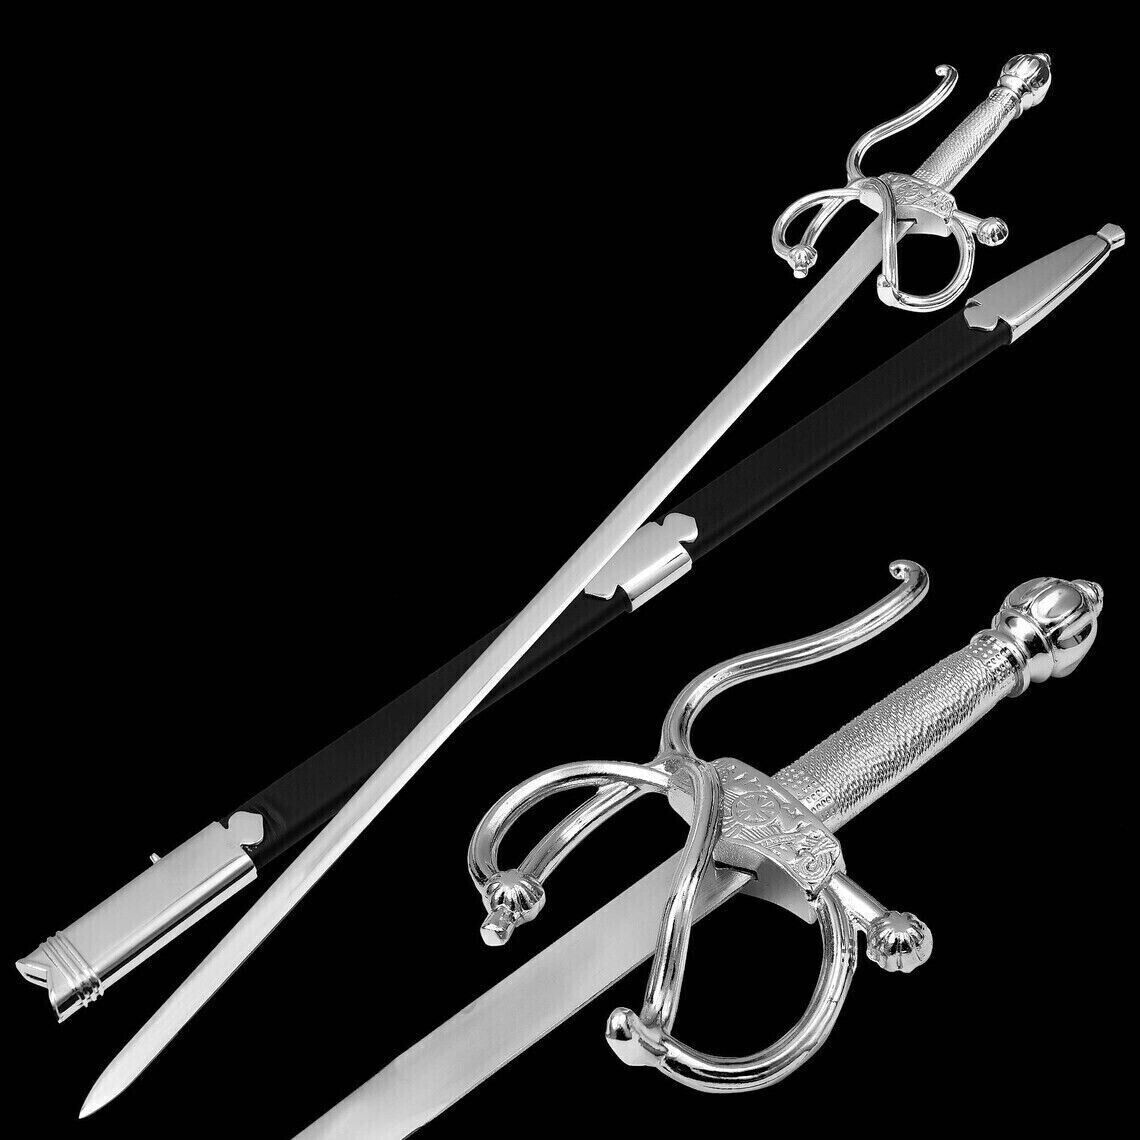 Marvelous Handmade Medieval Zorro Rapier Sword with Matching Scabbard